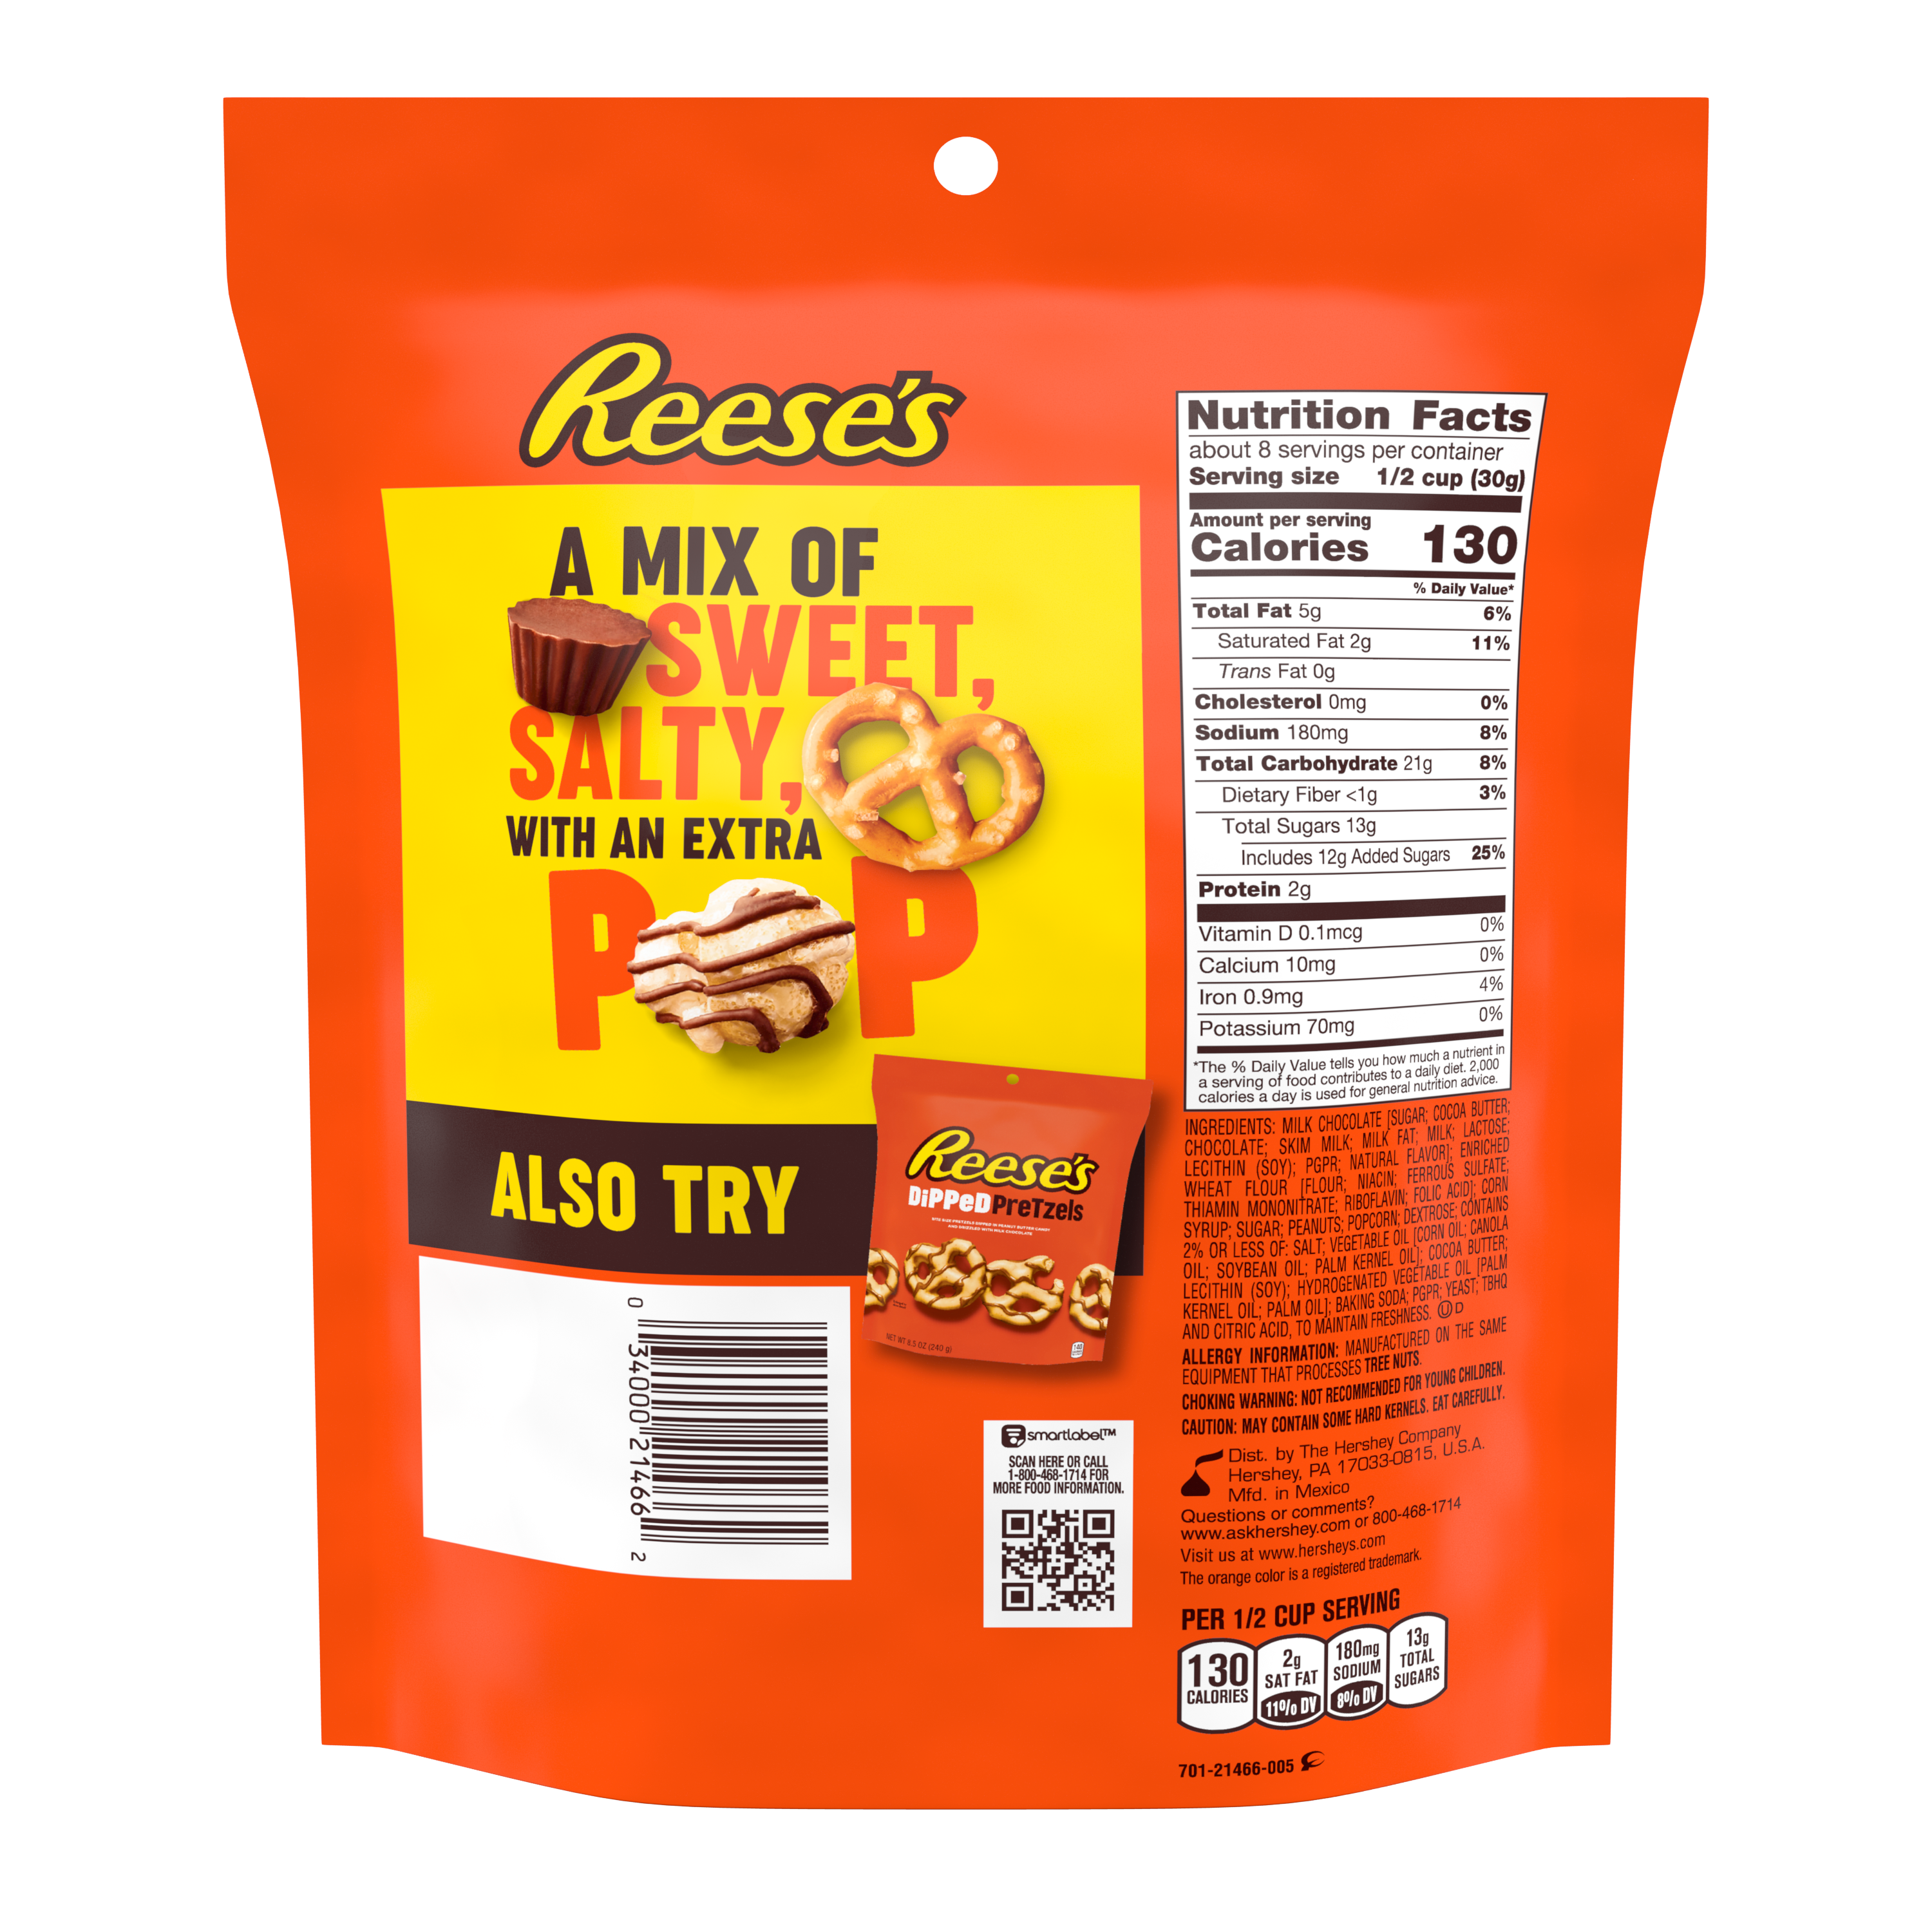 REESE'S Popped Milk Chocolate Peanut Butter Snack Mix, 8 oz bag - Back of Package